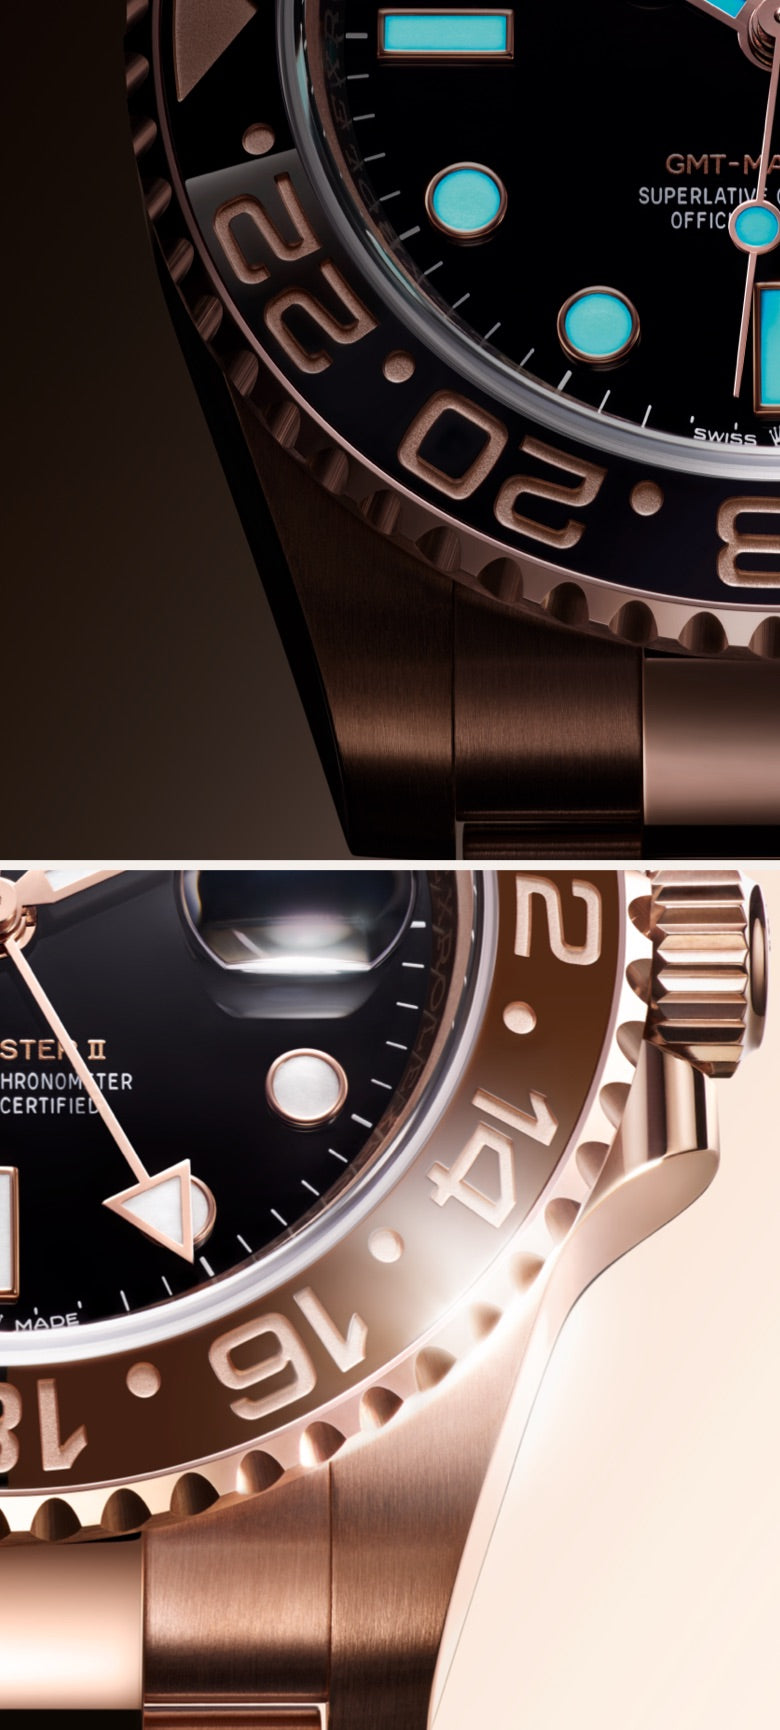 rolex gmt master ii watches - deacons jewellers